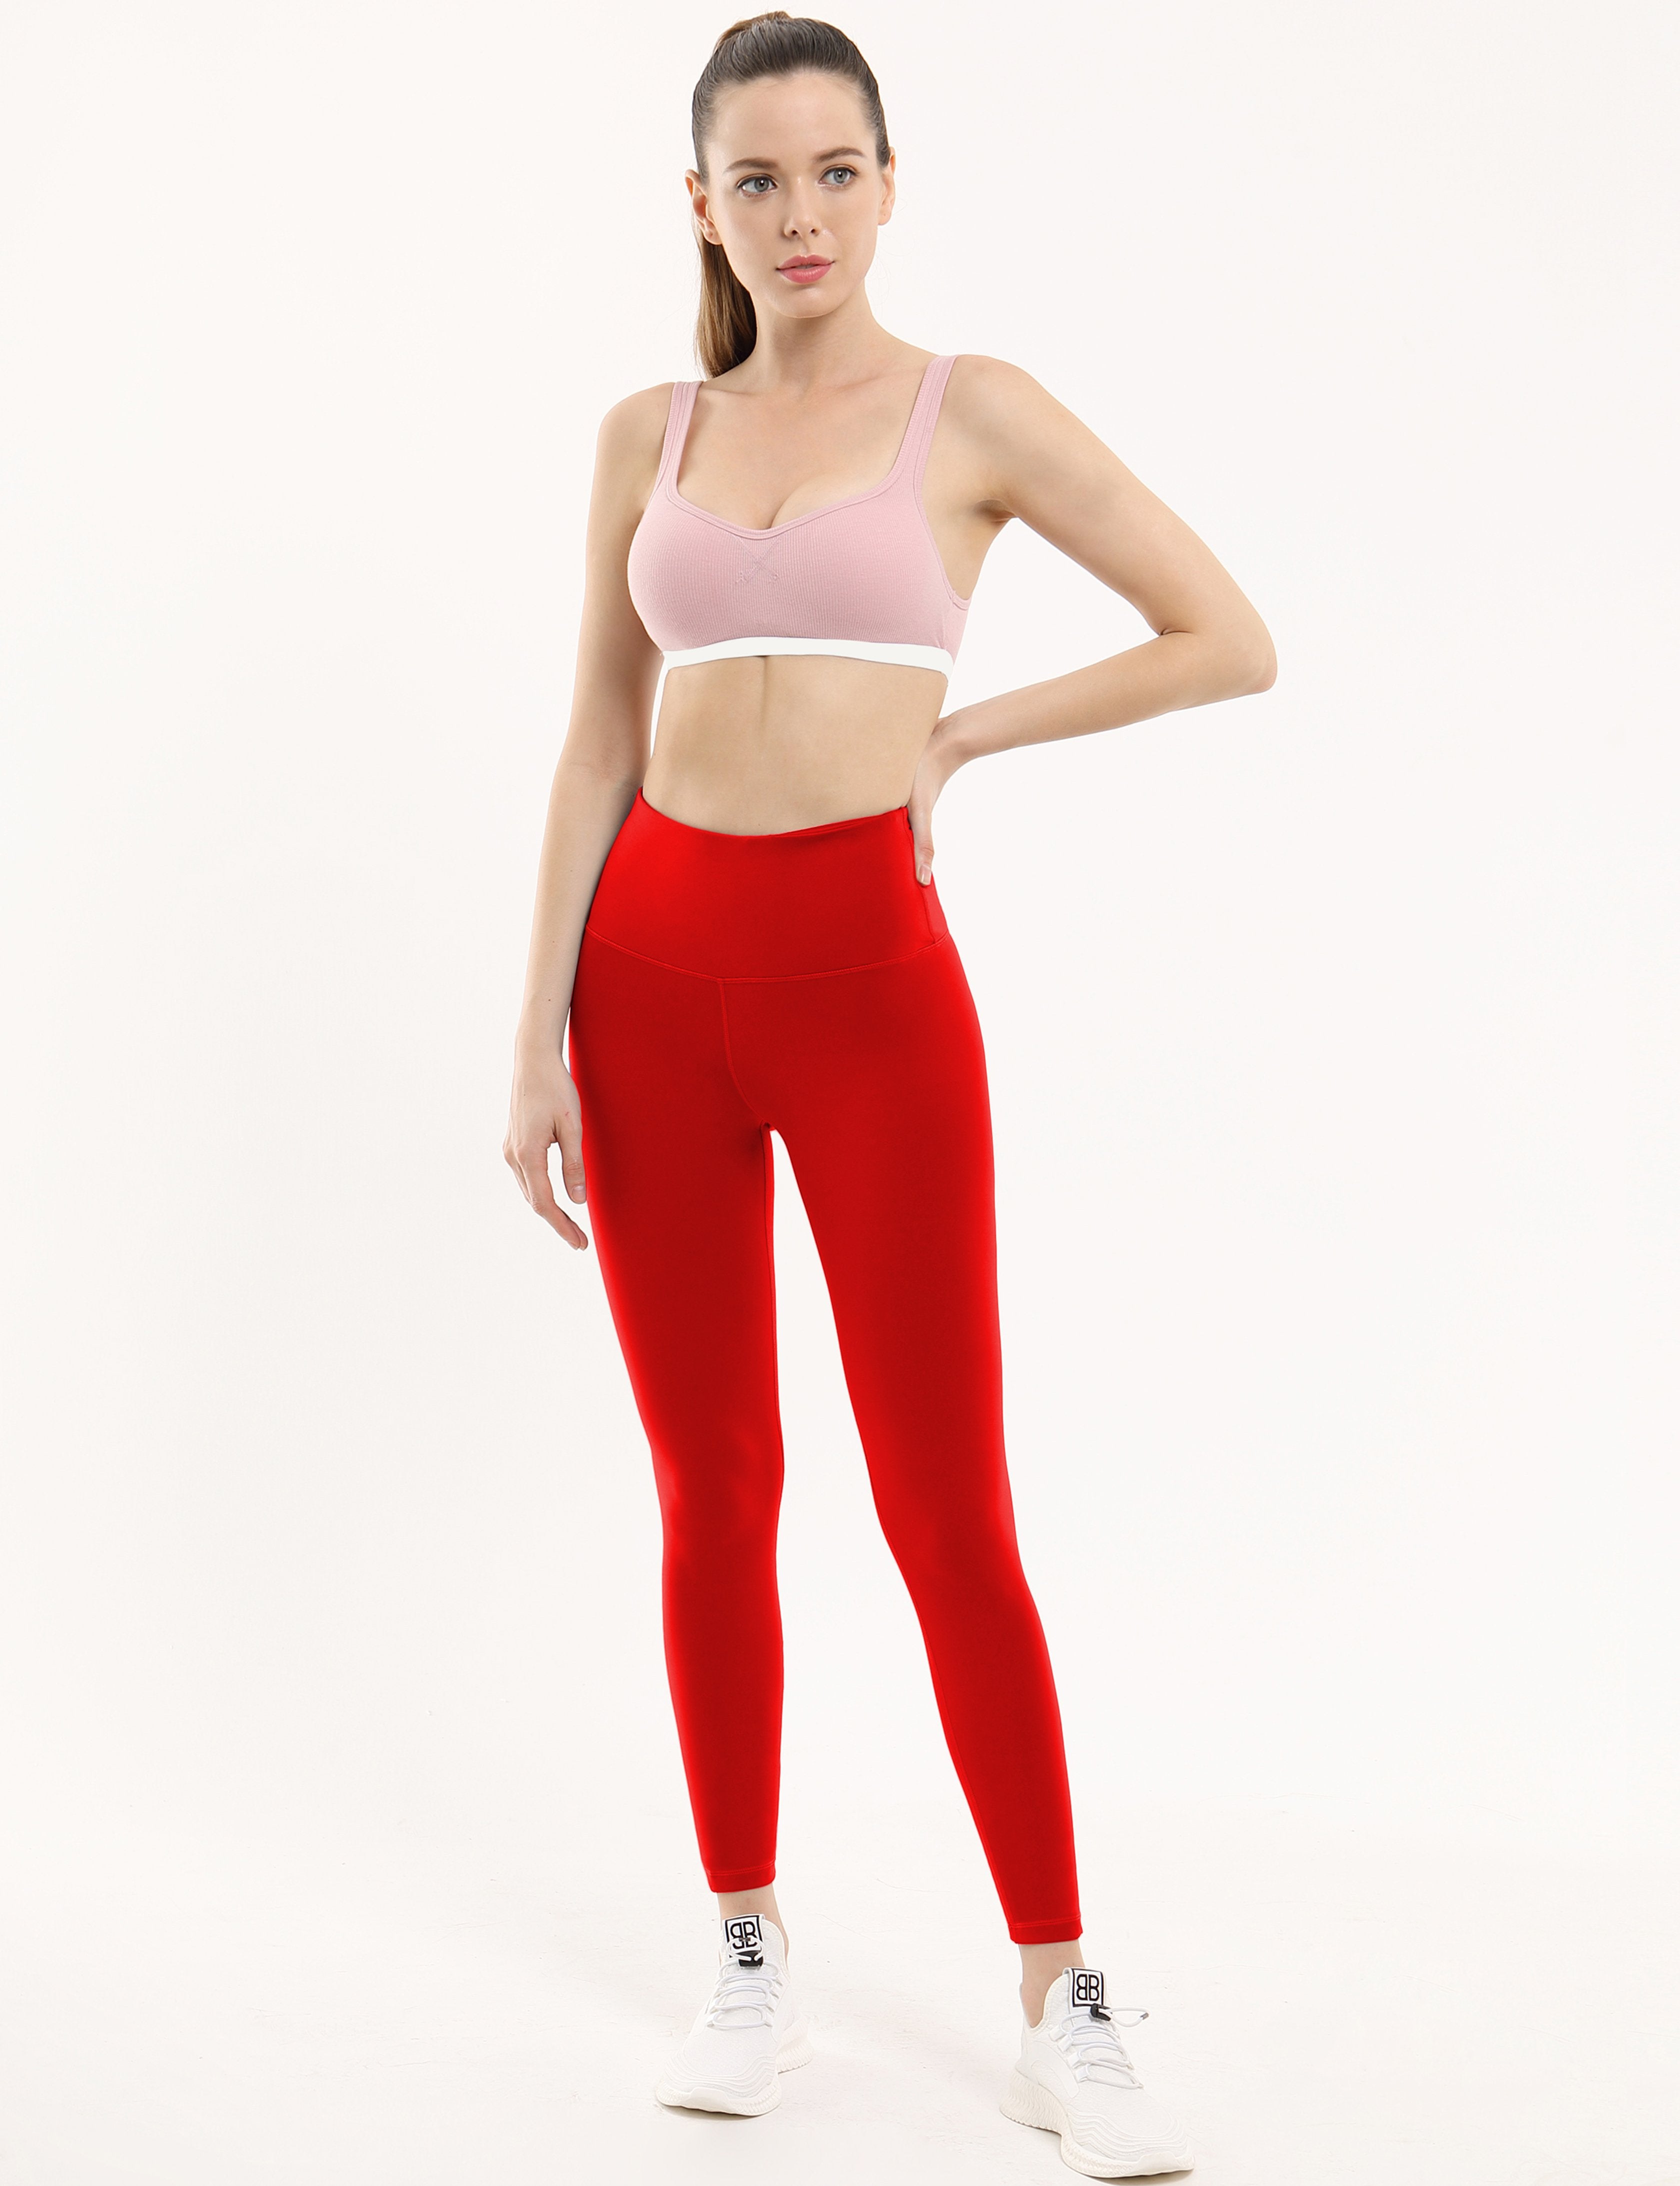 High Waist Yoga Pants scarlet 75%Nylon/25%Spandex Fabric doesn't attract lint easily 4-way stretch No see-through Moisture-wicking Tummy control Inner pocket Four lengths